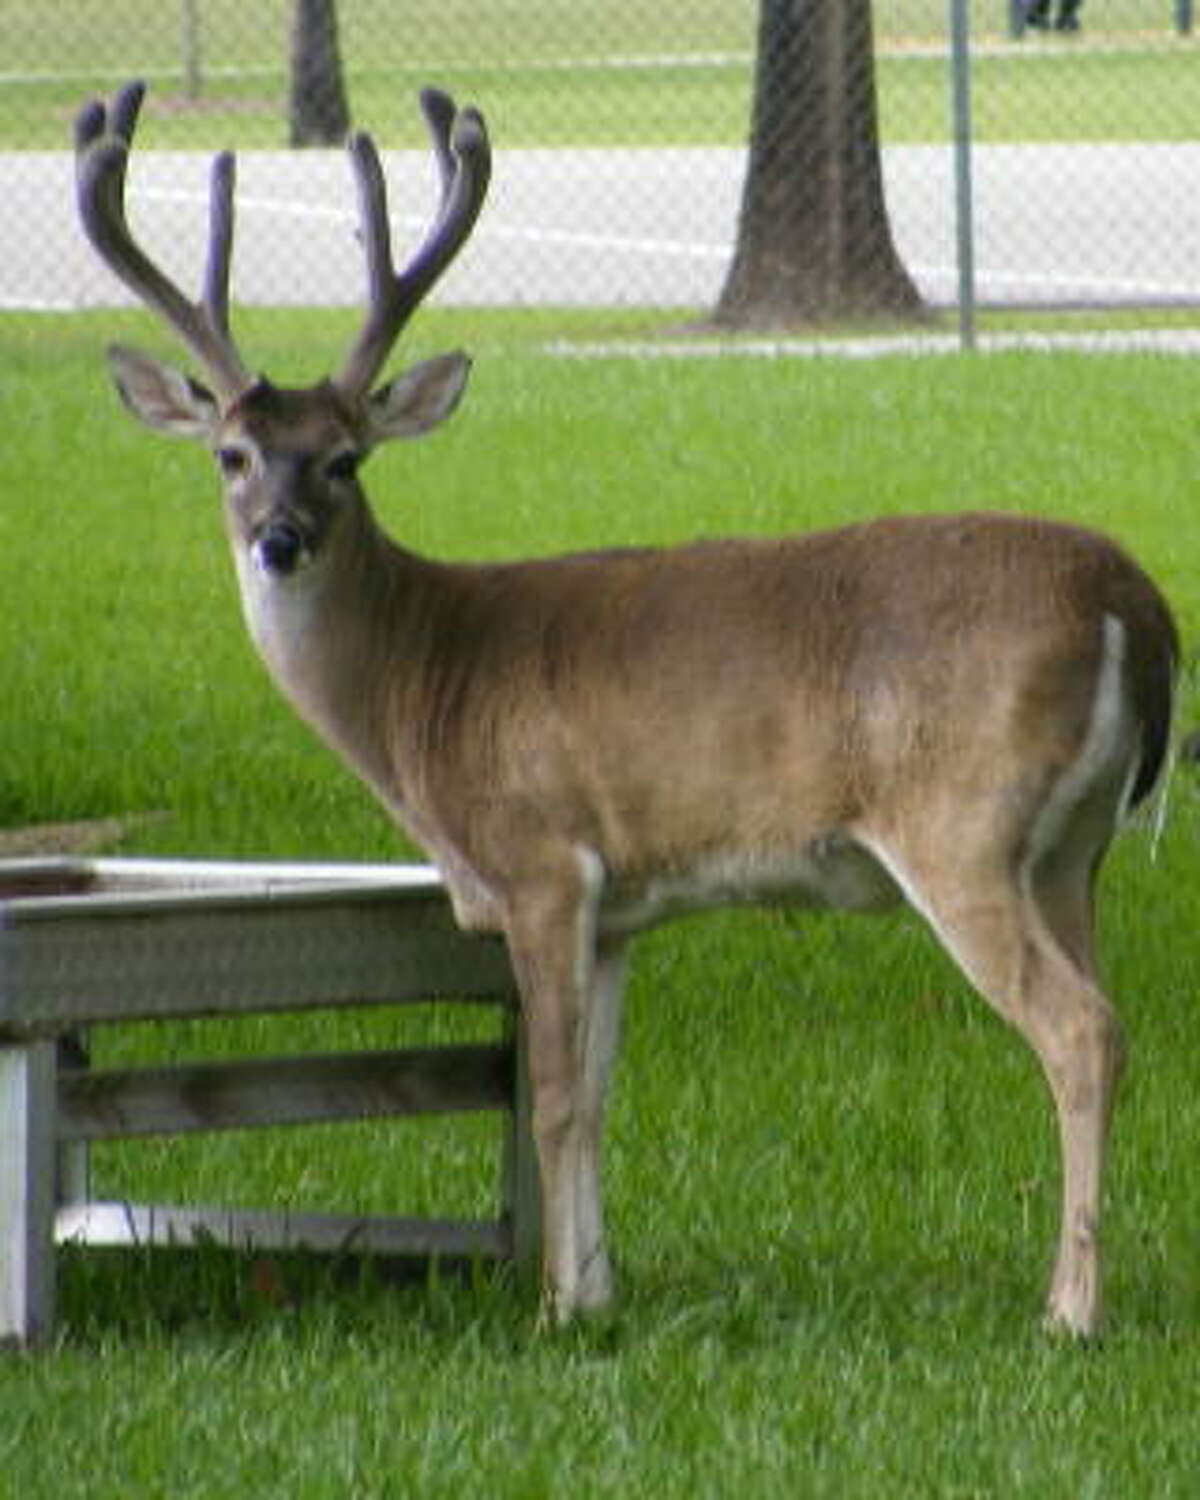 Officials said the deer, named Mr. Buck, was a favorite of schoolchildren at Bear Creek Pioneers Park.